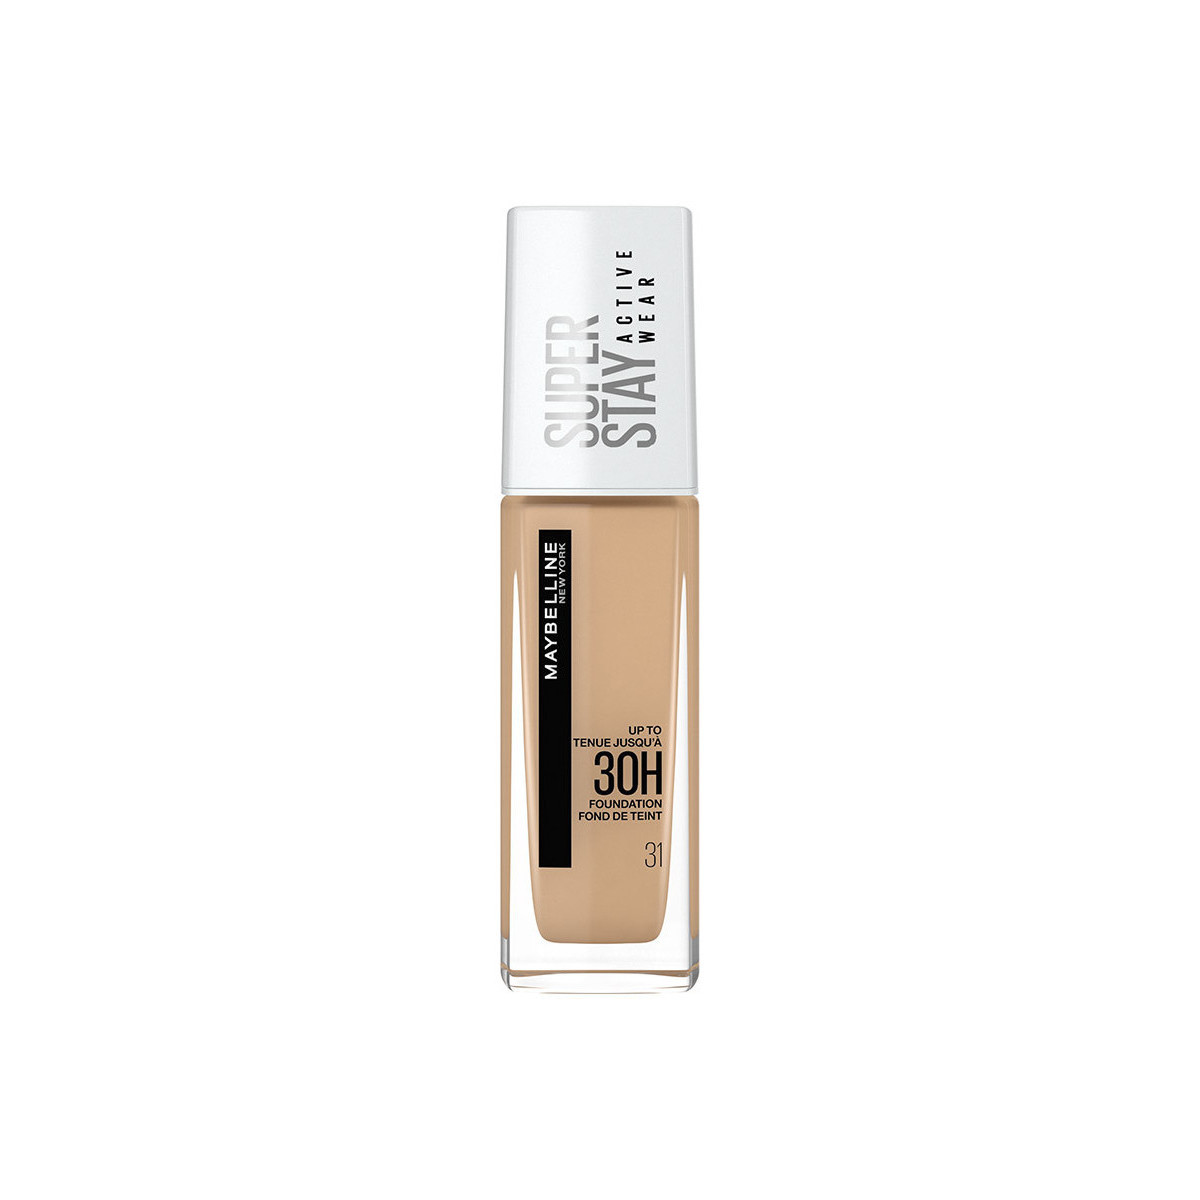 Beauty Make-up & Foundation  Maybelline New York Superstay Activewear 30h Foudation 31-warm Nude 